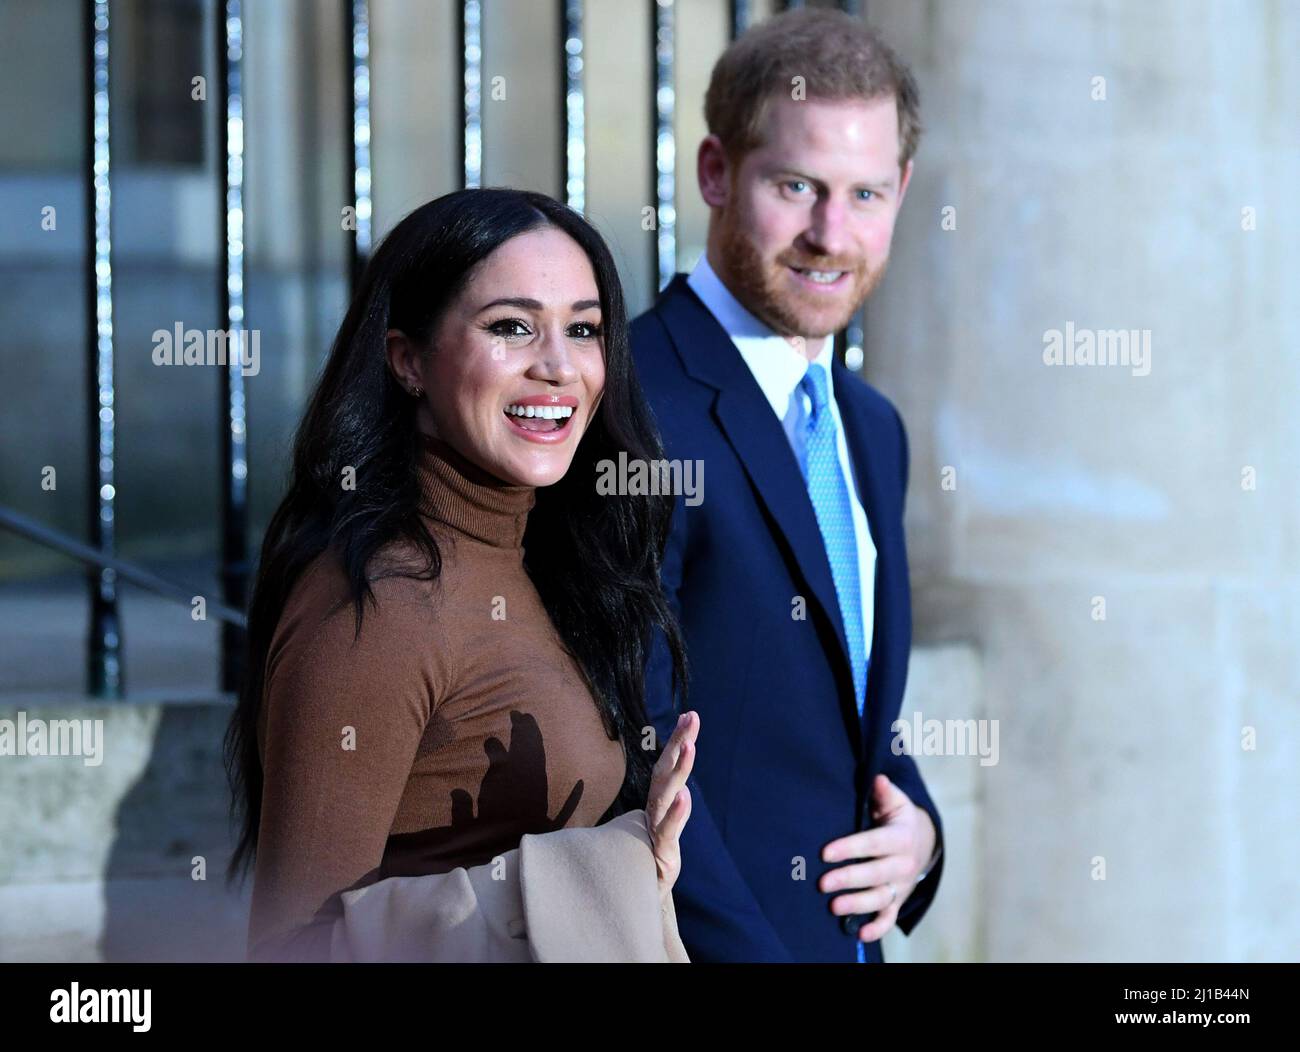 File photo dated 7/1/2020 of he Duke and Duchess of Sussex leaving after their visit to Canada House, central London. The Duchess has unveiled her first Spotify series - a podcast about female stereotypes, in which she vows to investigate 'labels that try to hold women back'. Archetypes will launch this summer, hosted by Meghan who will speak to historians, experts and woman who have experienced being typecast. Issue date: Thursday March 24, 2022. Stock Photo